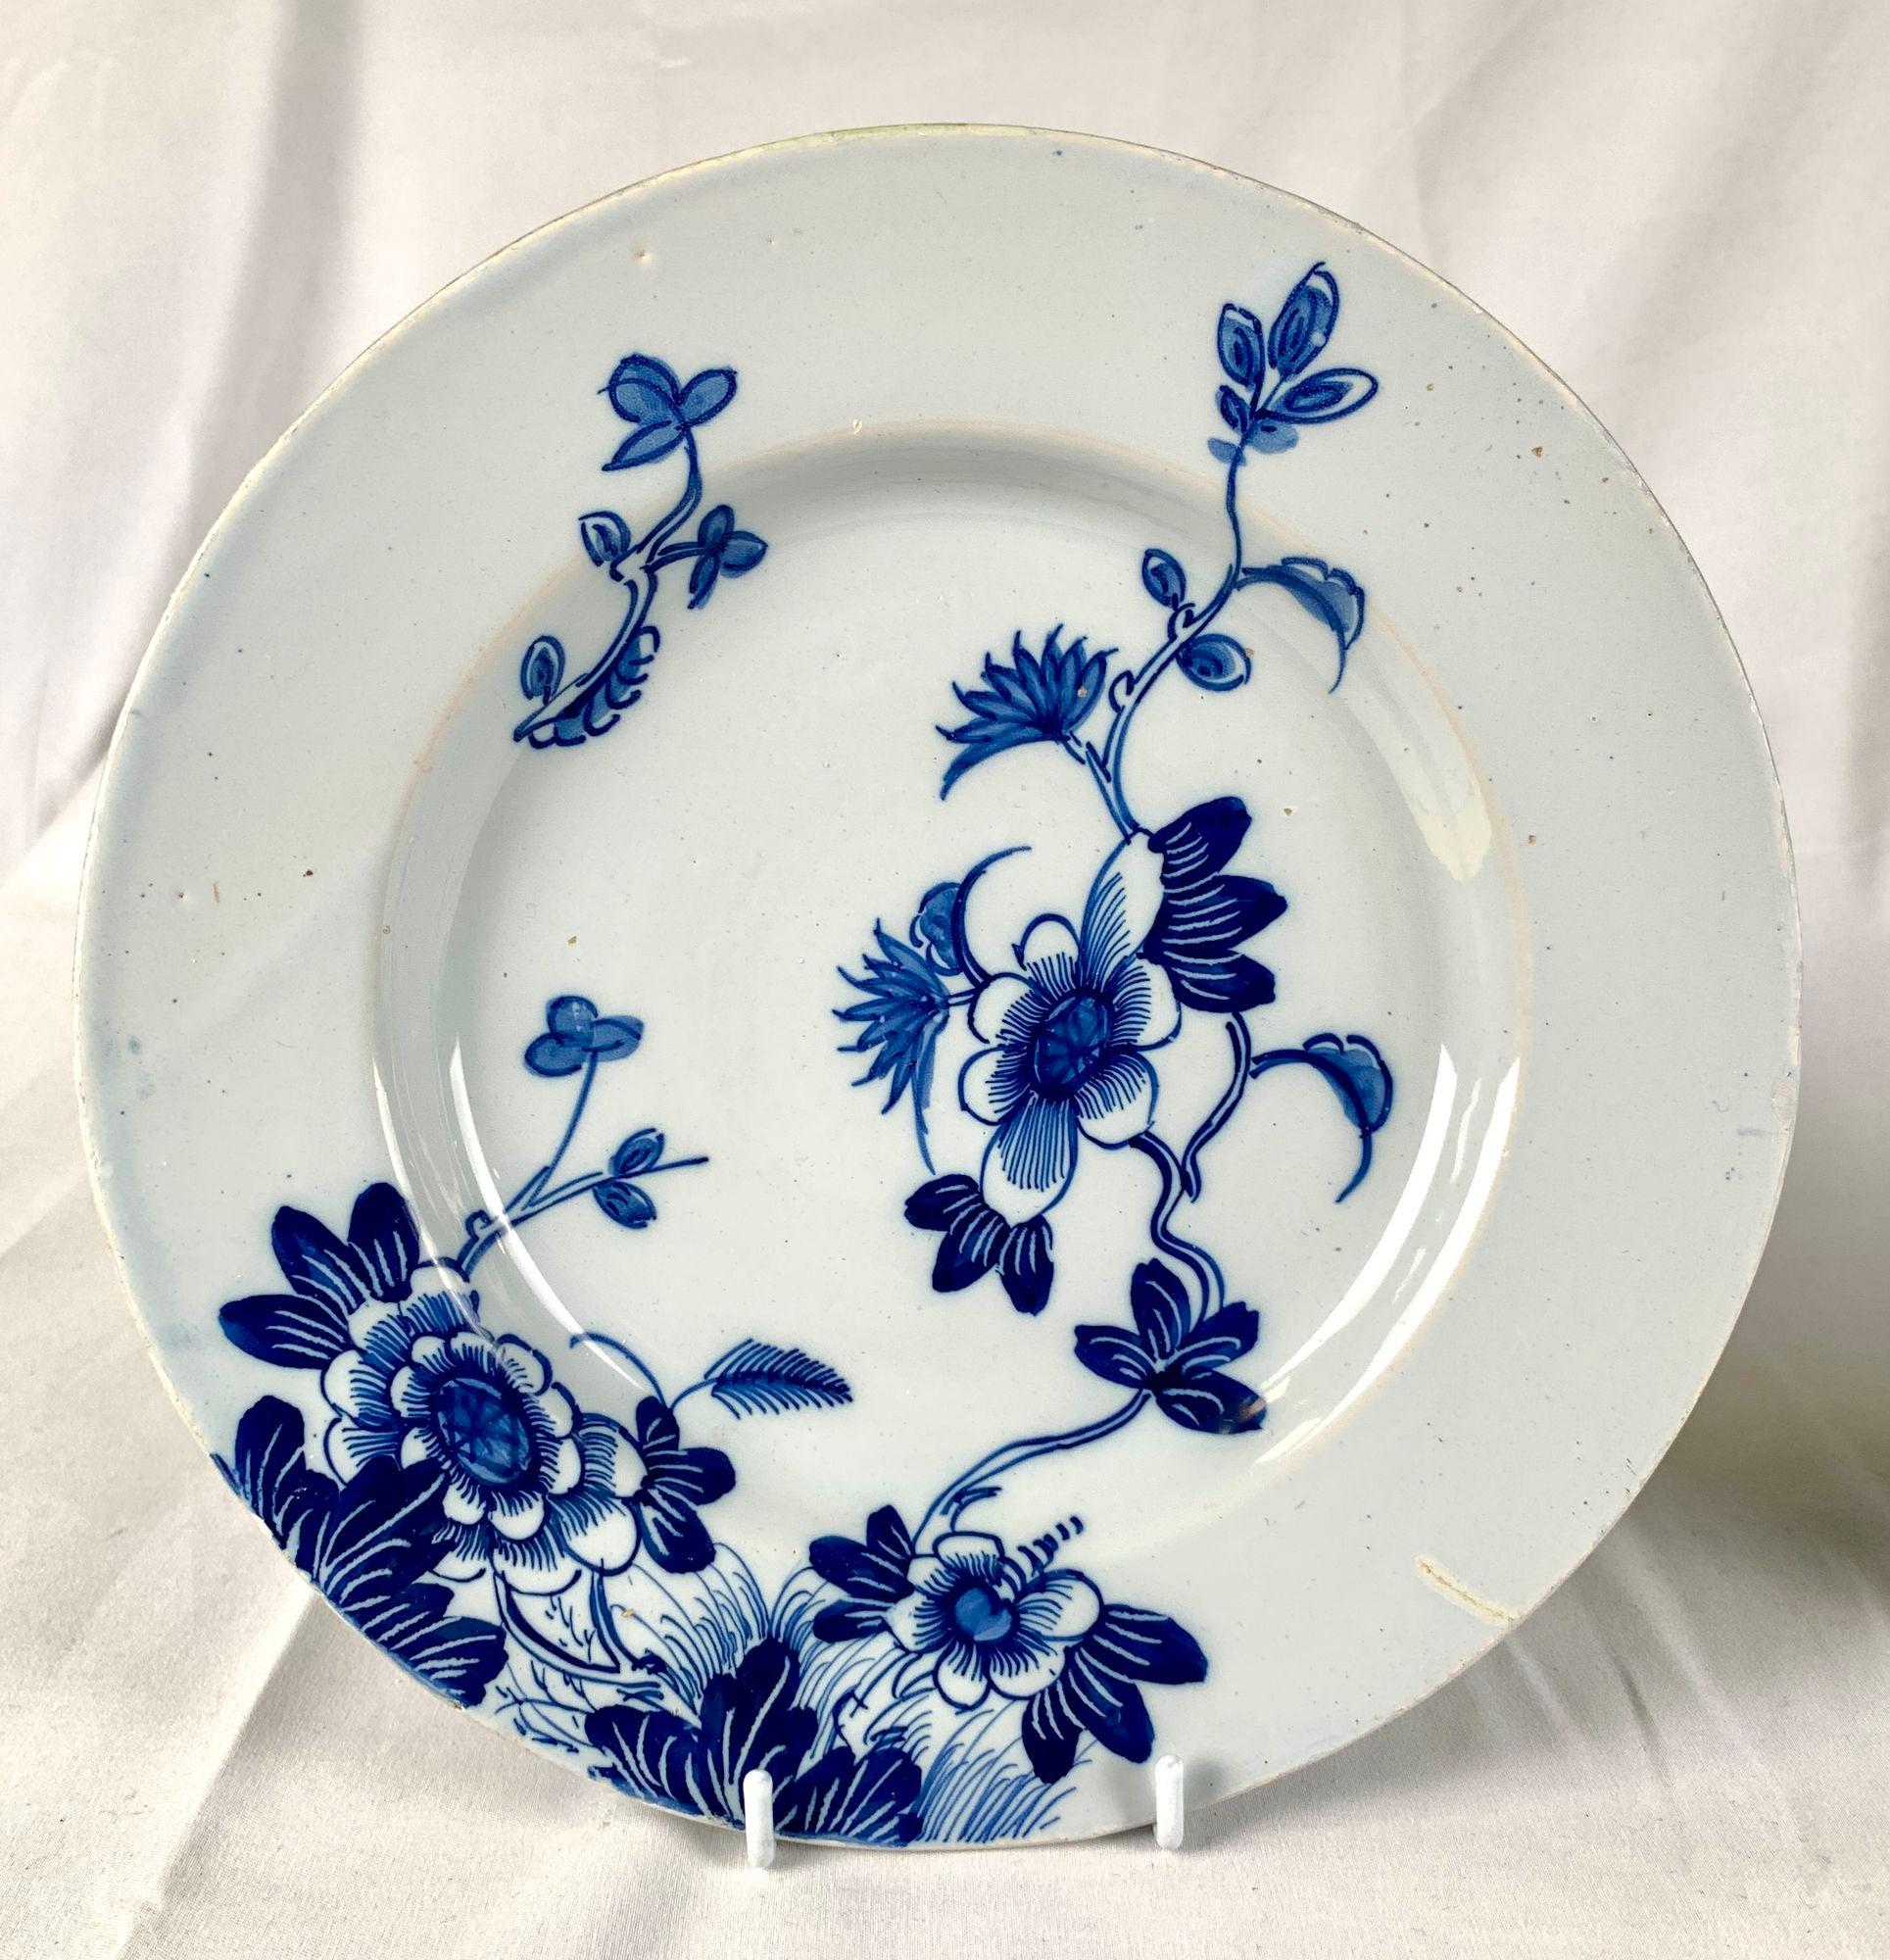 This gorgeous pair of blue and white English Delft plates was made in Bristol, England, circa 1760.
The lovely floral decoration is hand painted in shades of cobalt blue on a light cobalt blue ground.
One flower on the vine stretches rim to rim from